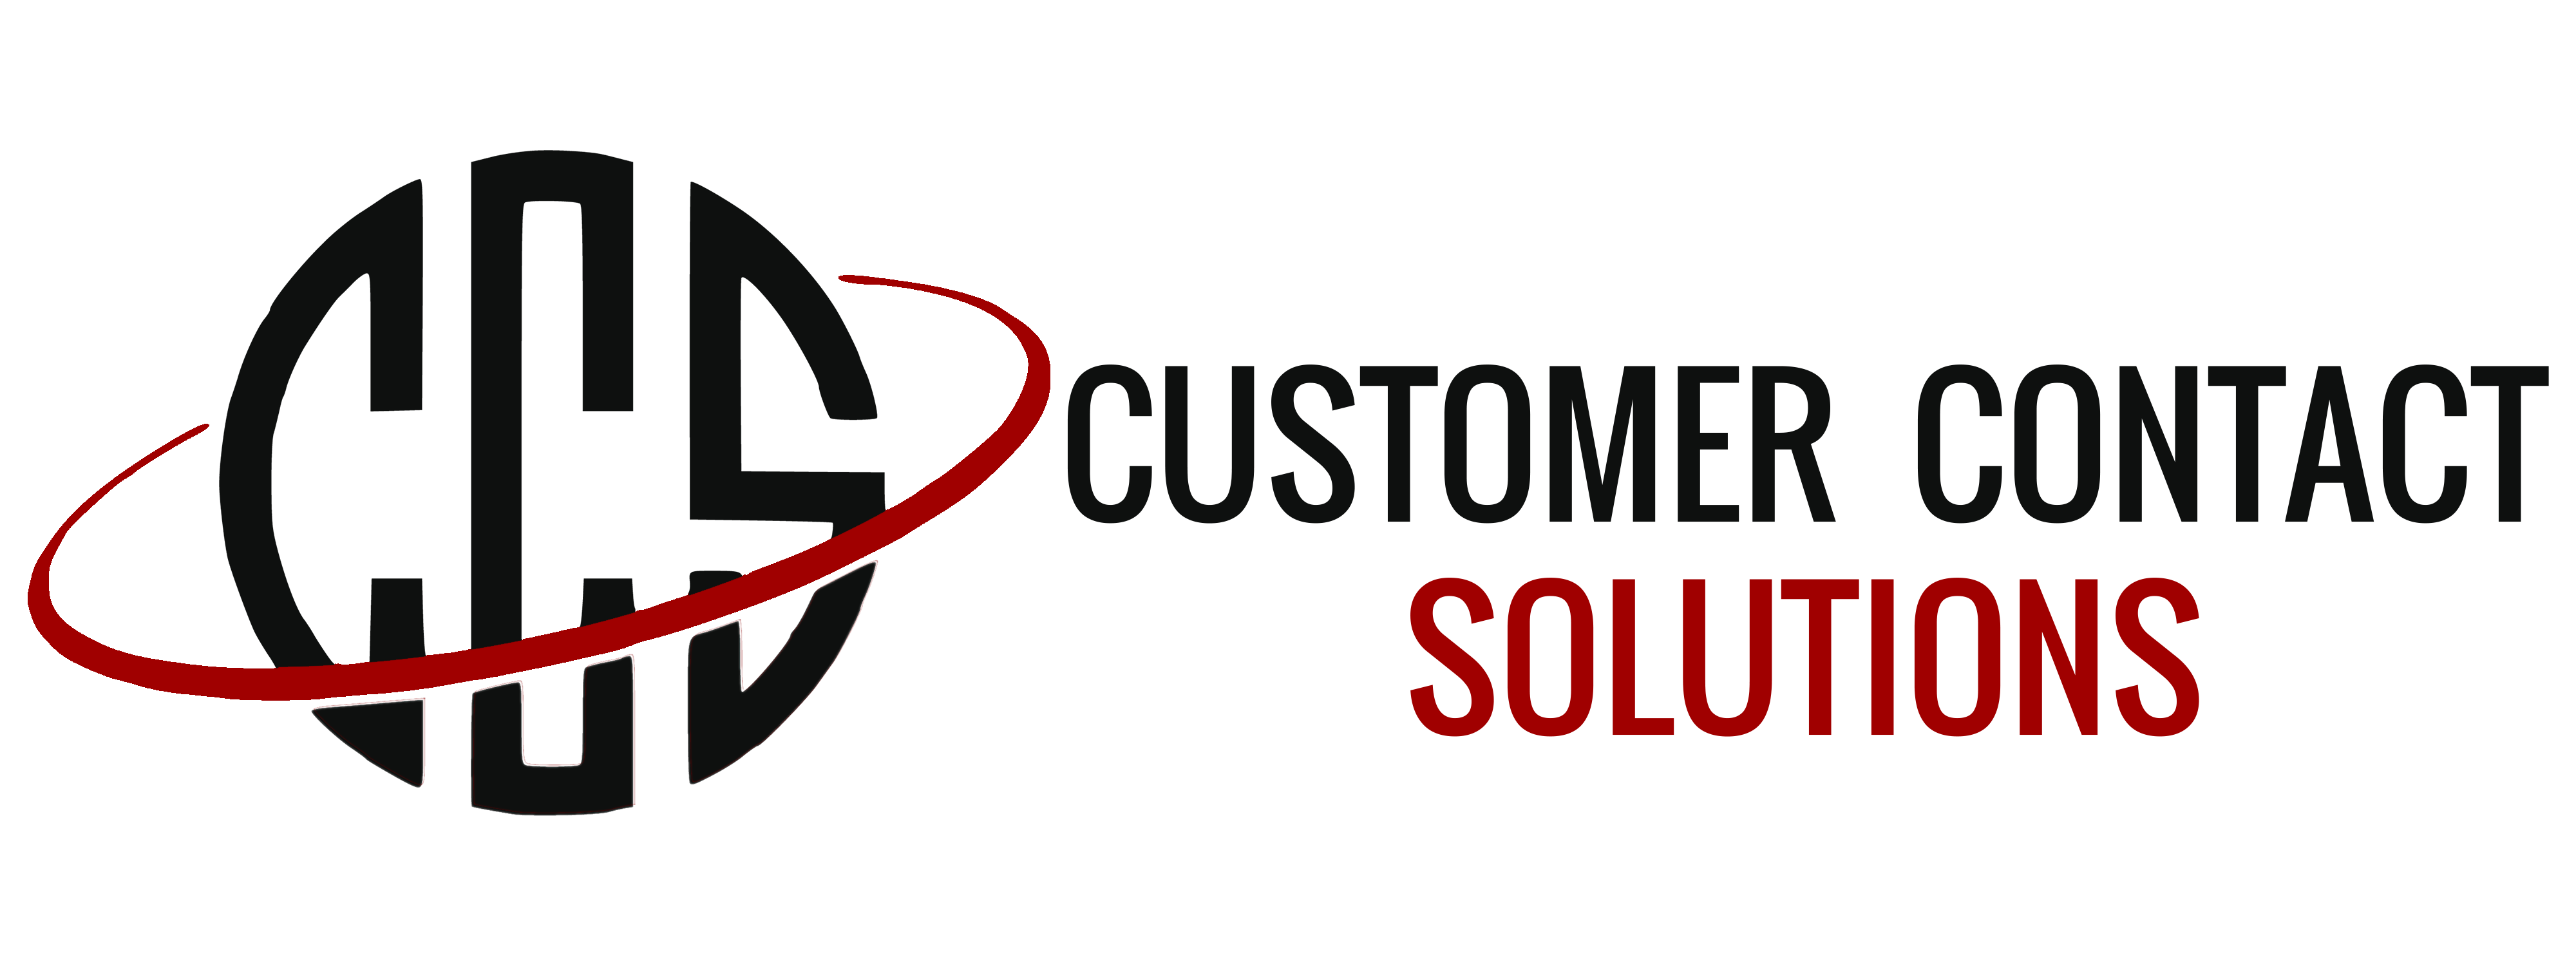 Customer Contact Solutions – 2.75 & $0.25